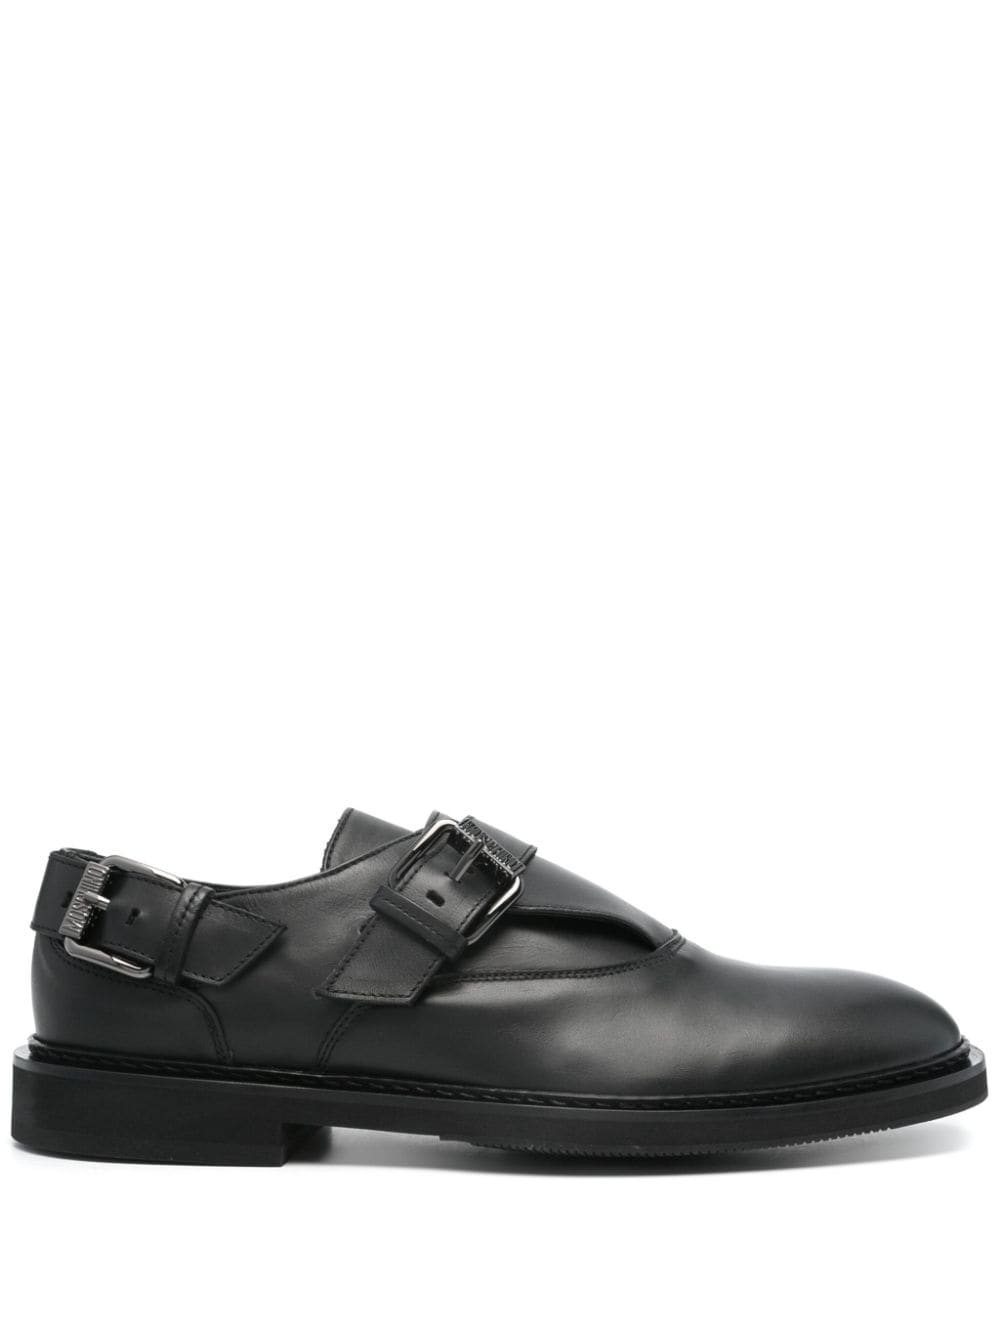 Moschino Micro Buckled Leather Monk Shoes In Black